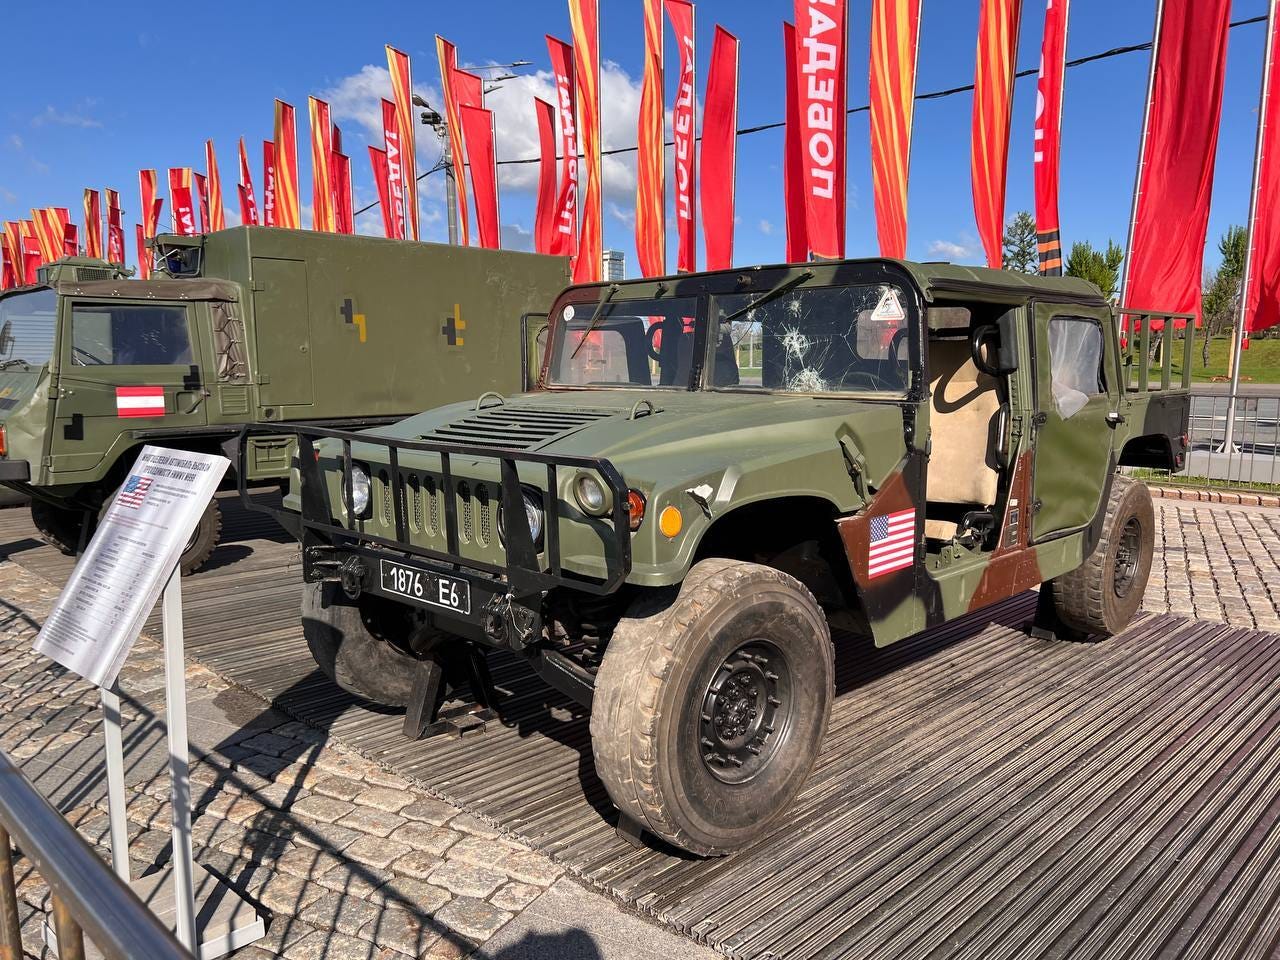 A Humvee with a cracked windshield on display in Moscow.